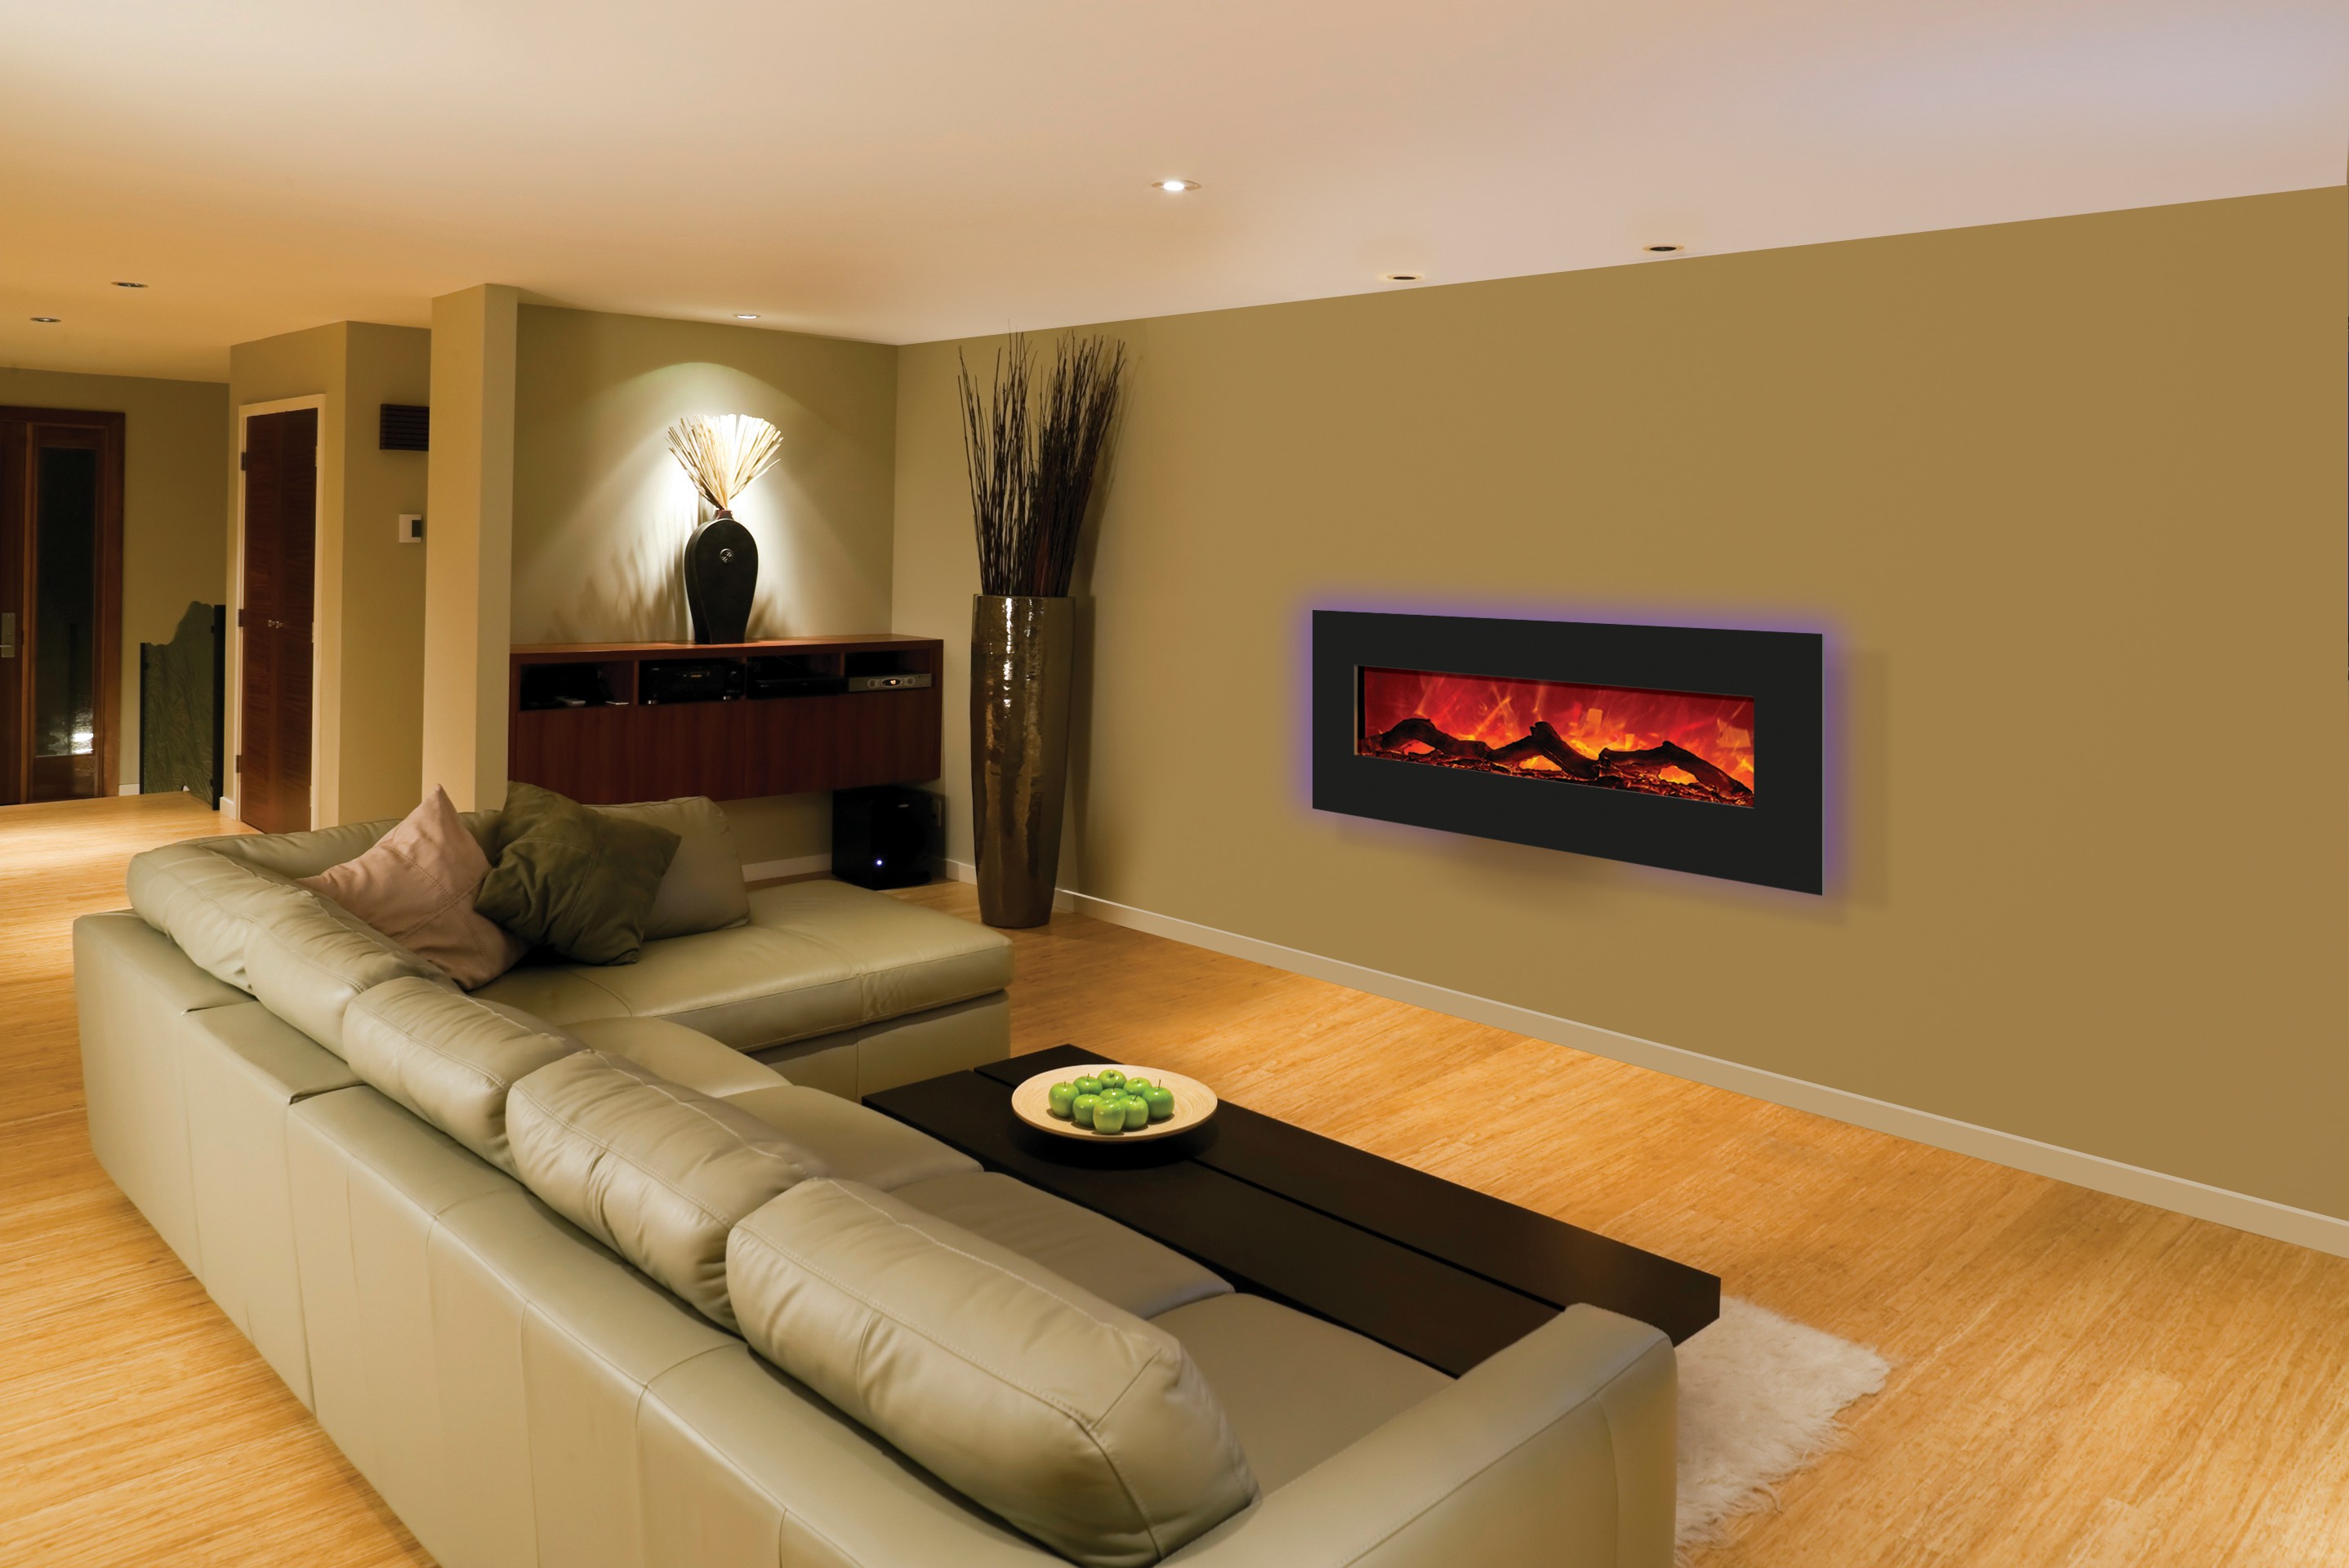 Modern Electric Fireplace with Mantel Inspirational Cool Electric Fireplace Ideas Fireplace Design Ideas